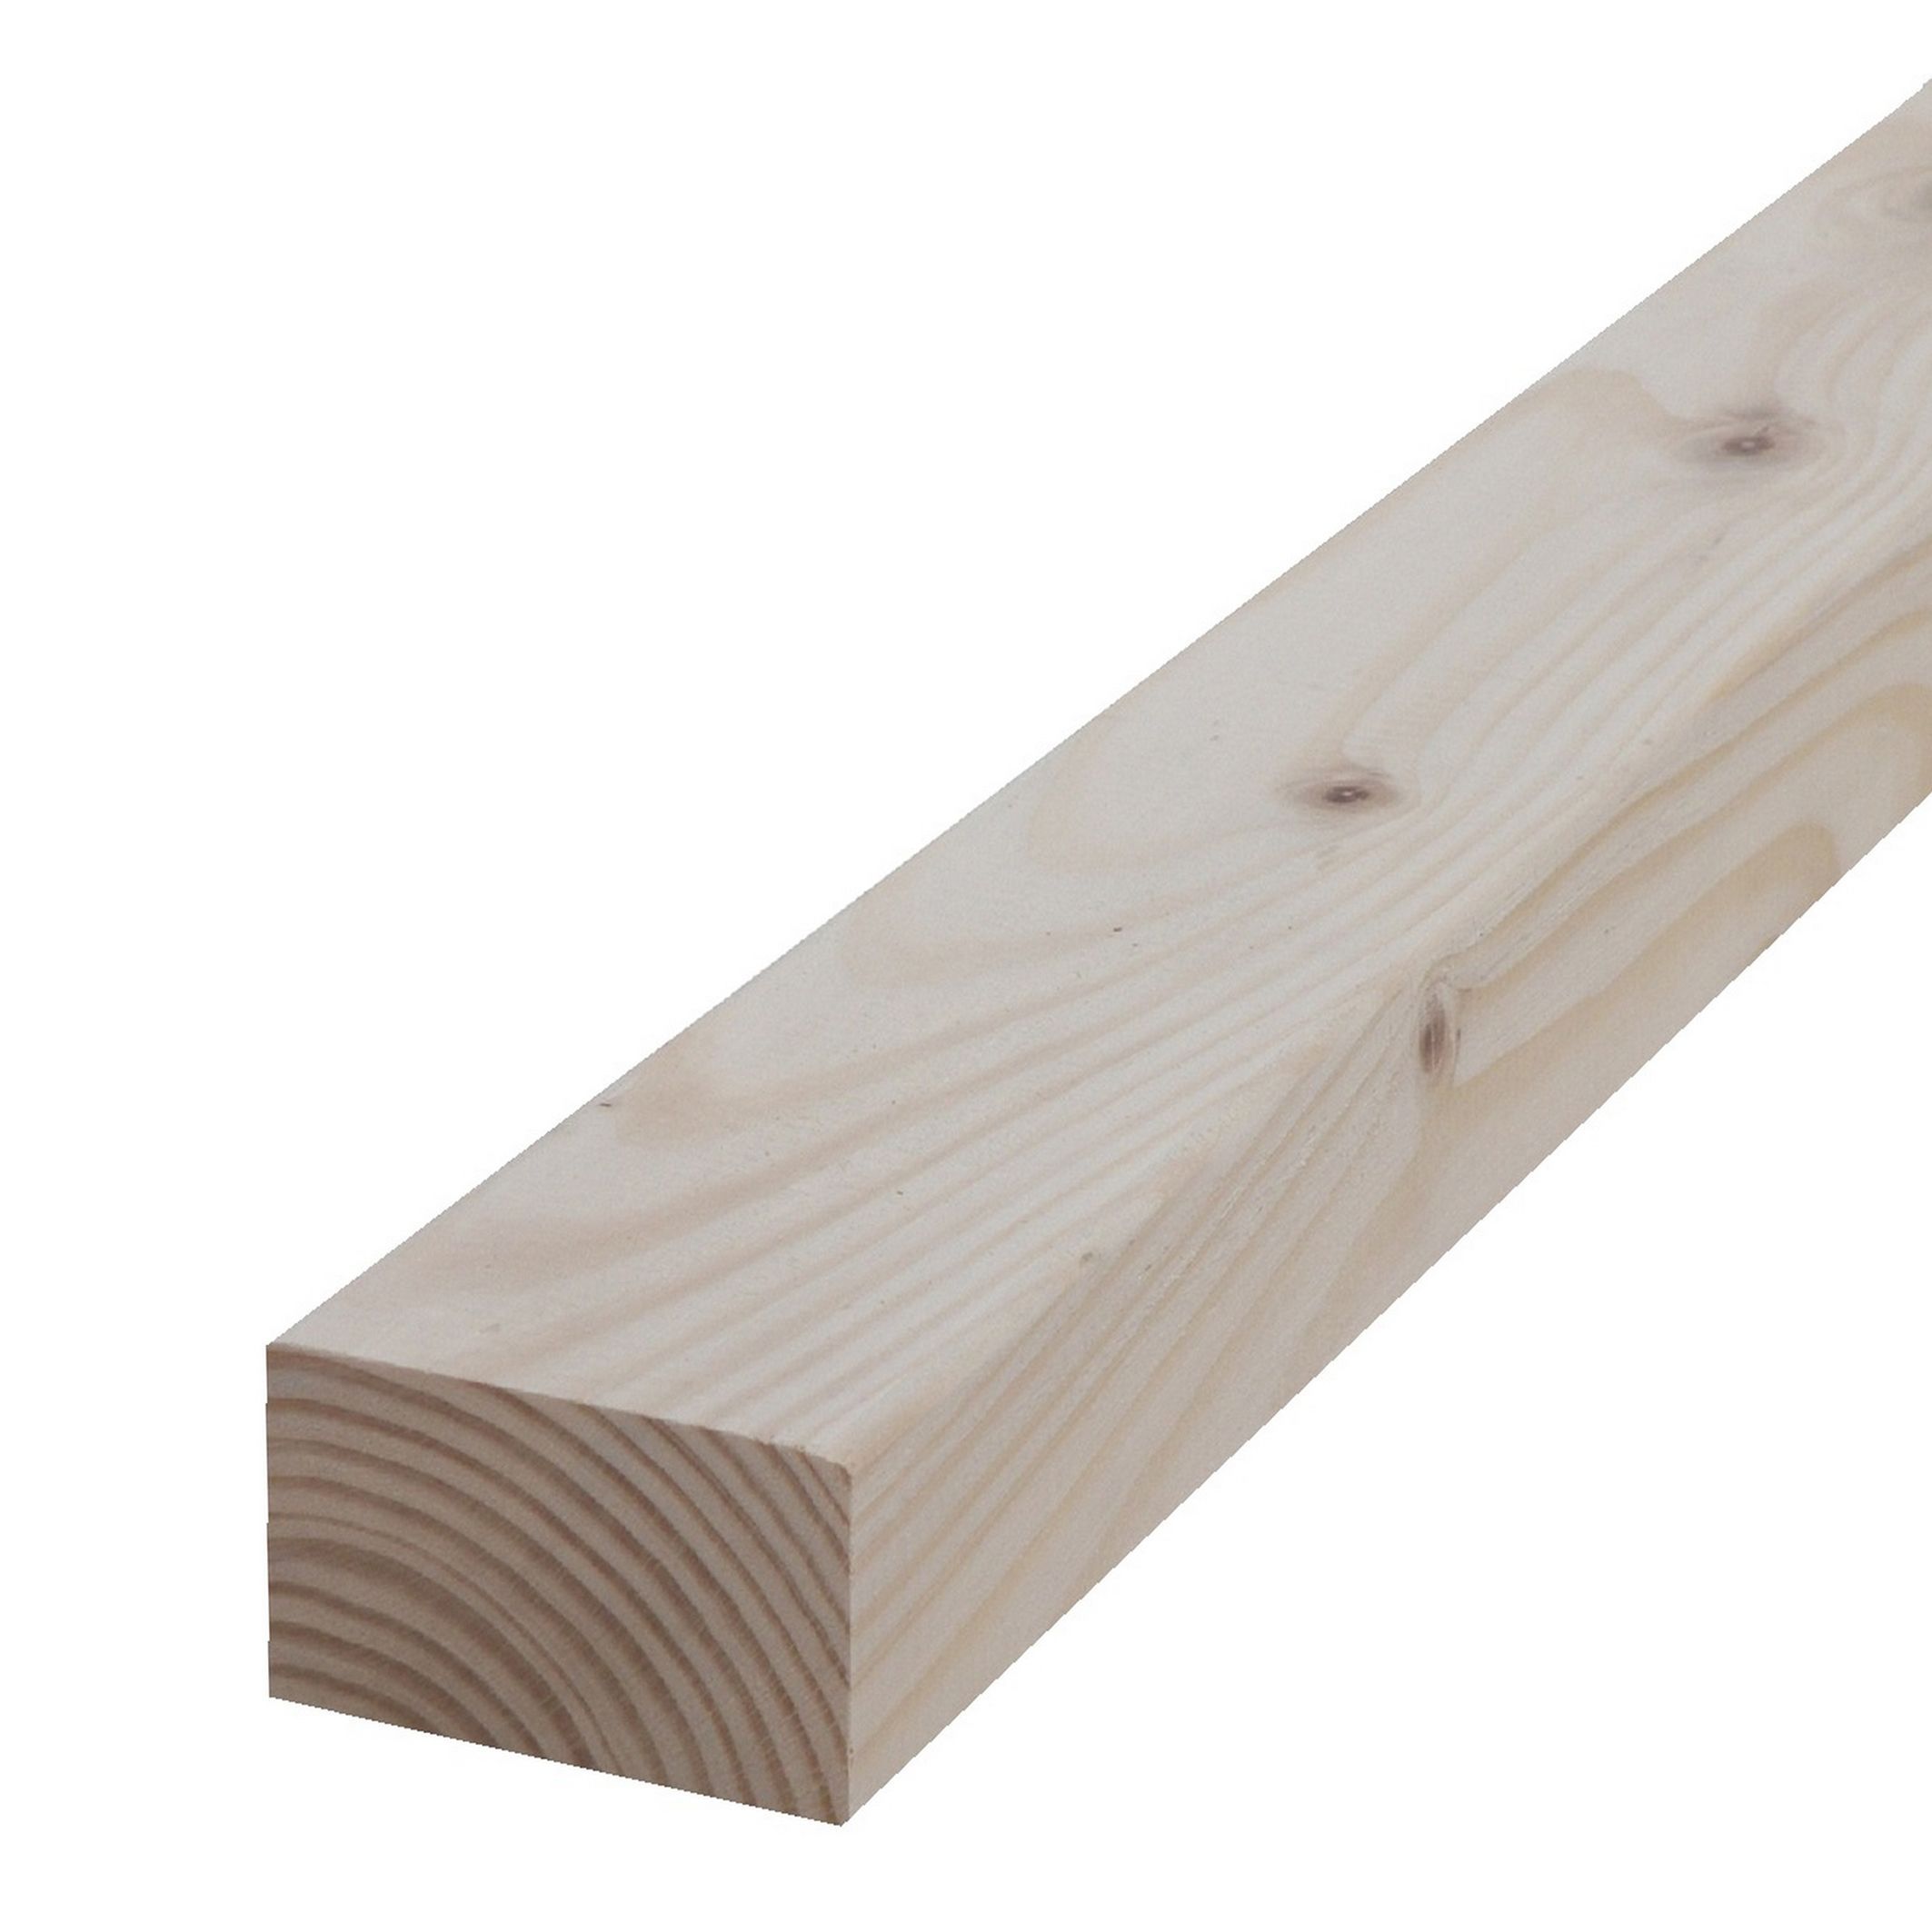 Metsä Wood Planed Round edge C16 CLS timber (L)2.4m (W)89mm (T)38mm